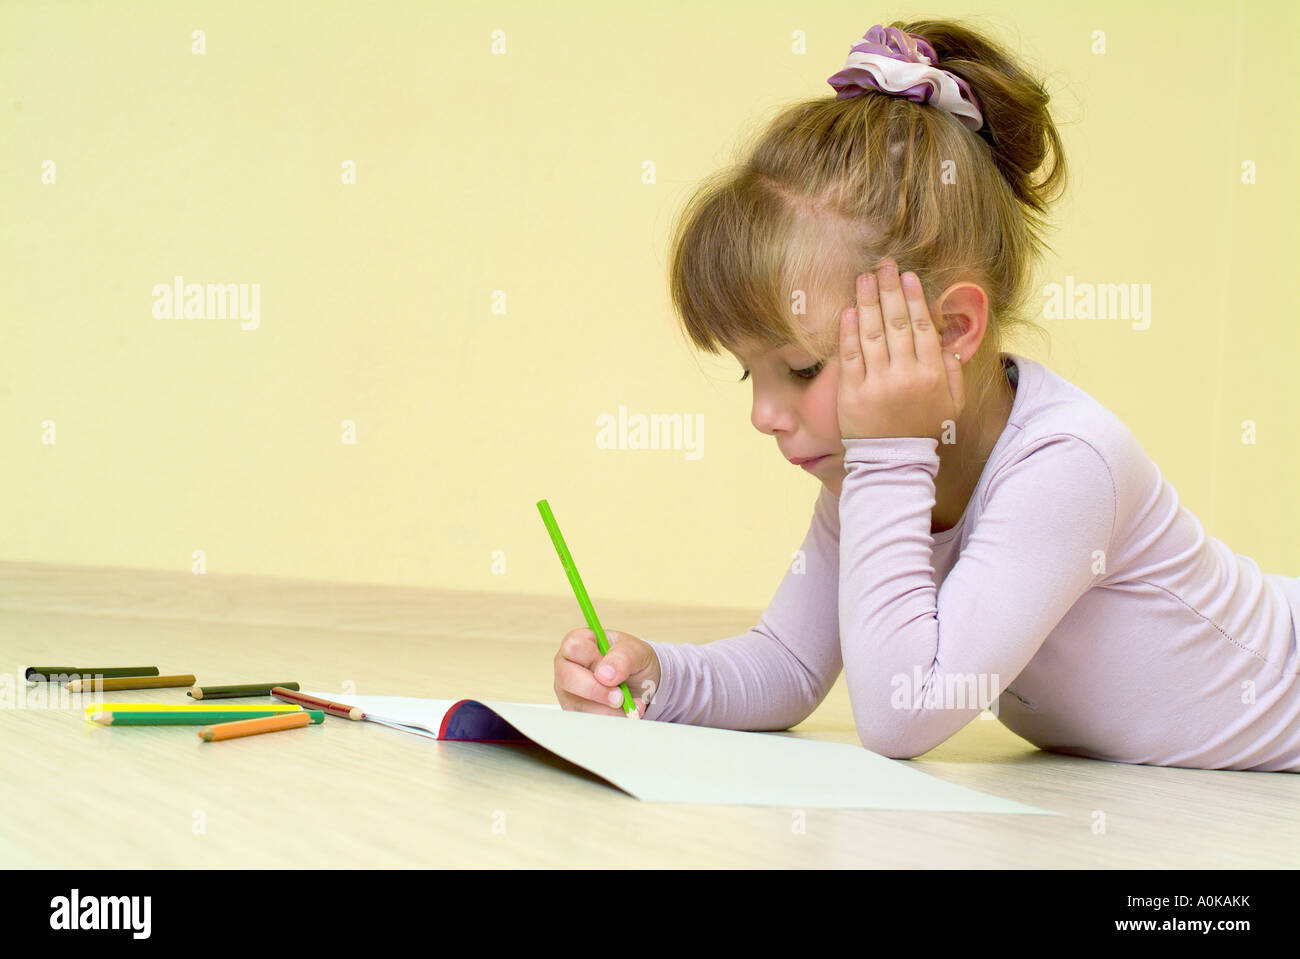 young girl using crayons in her colouring book Stock Photo